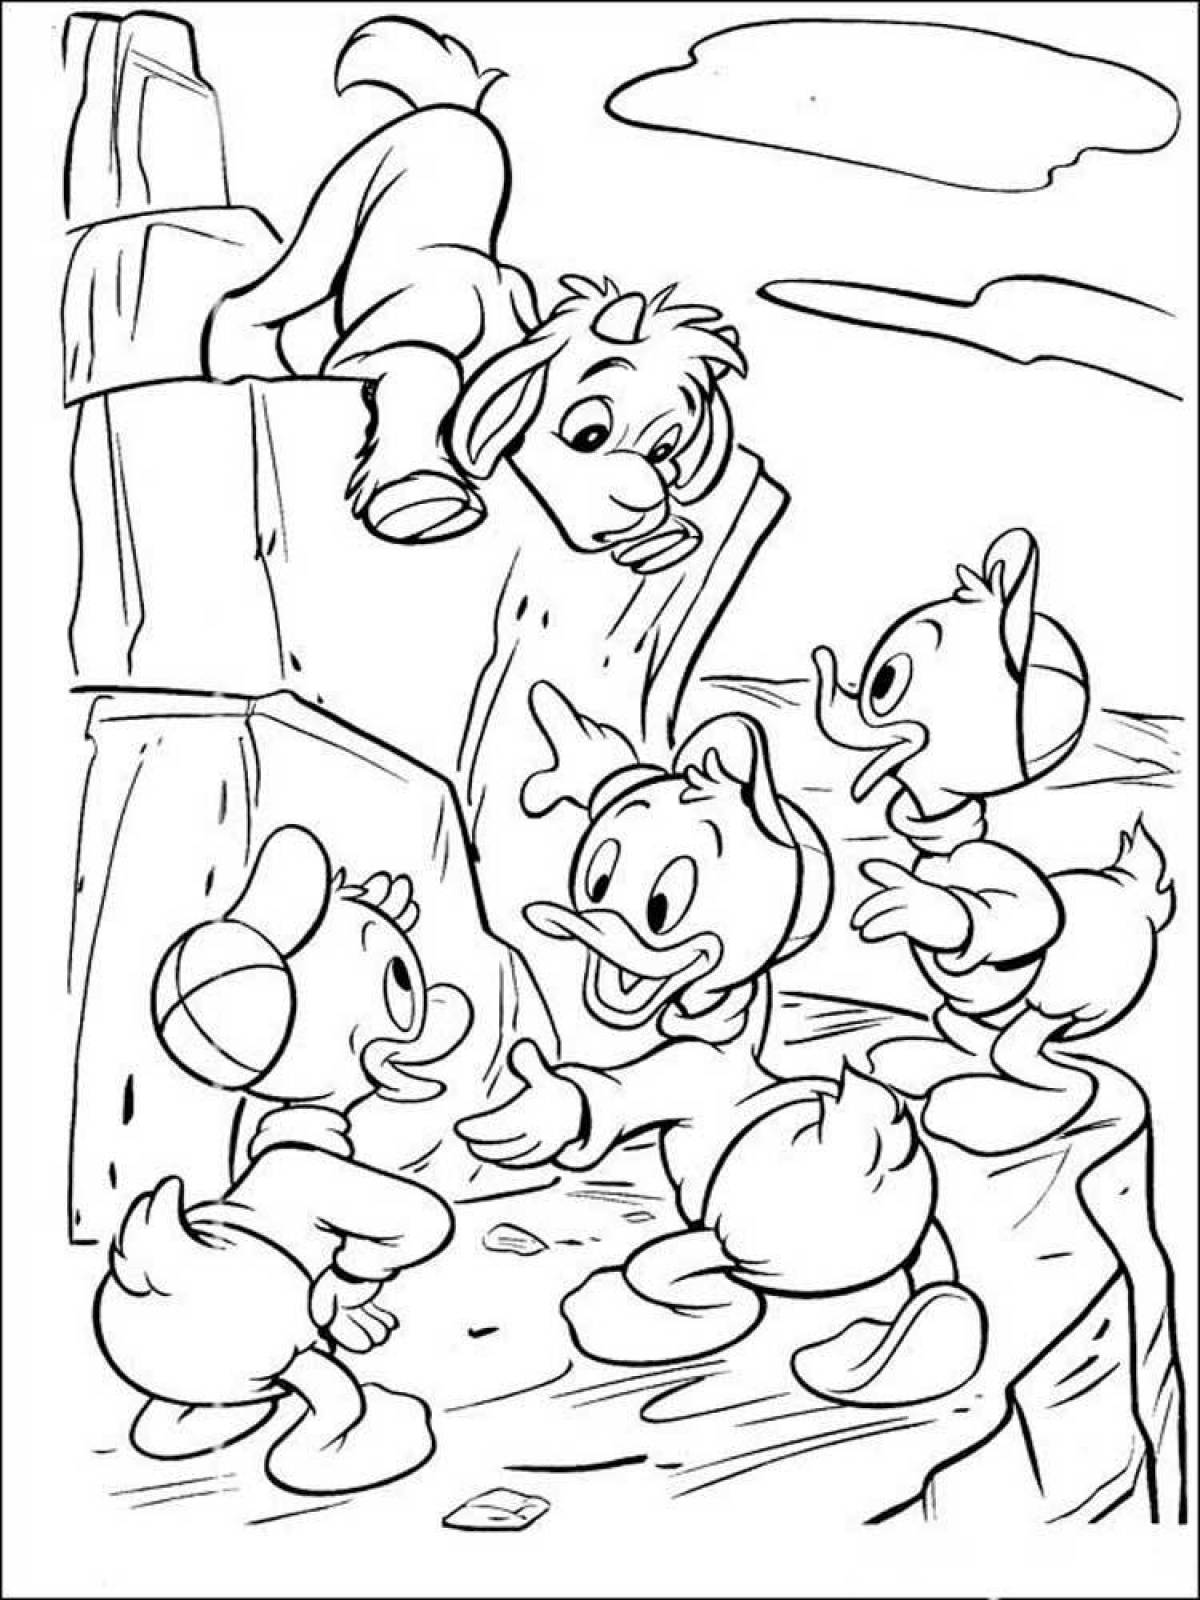 Rampant tilly willy coloring book